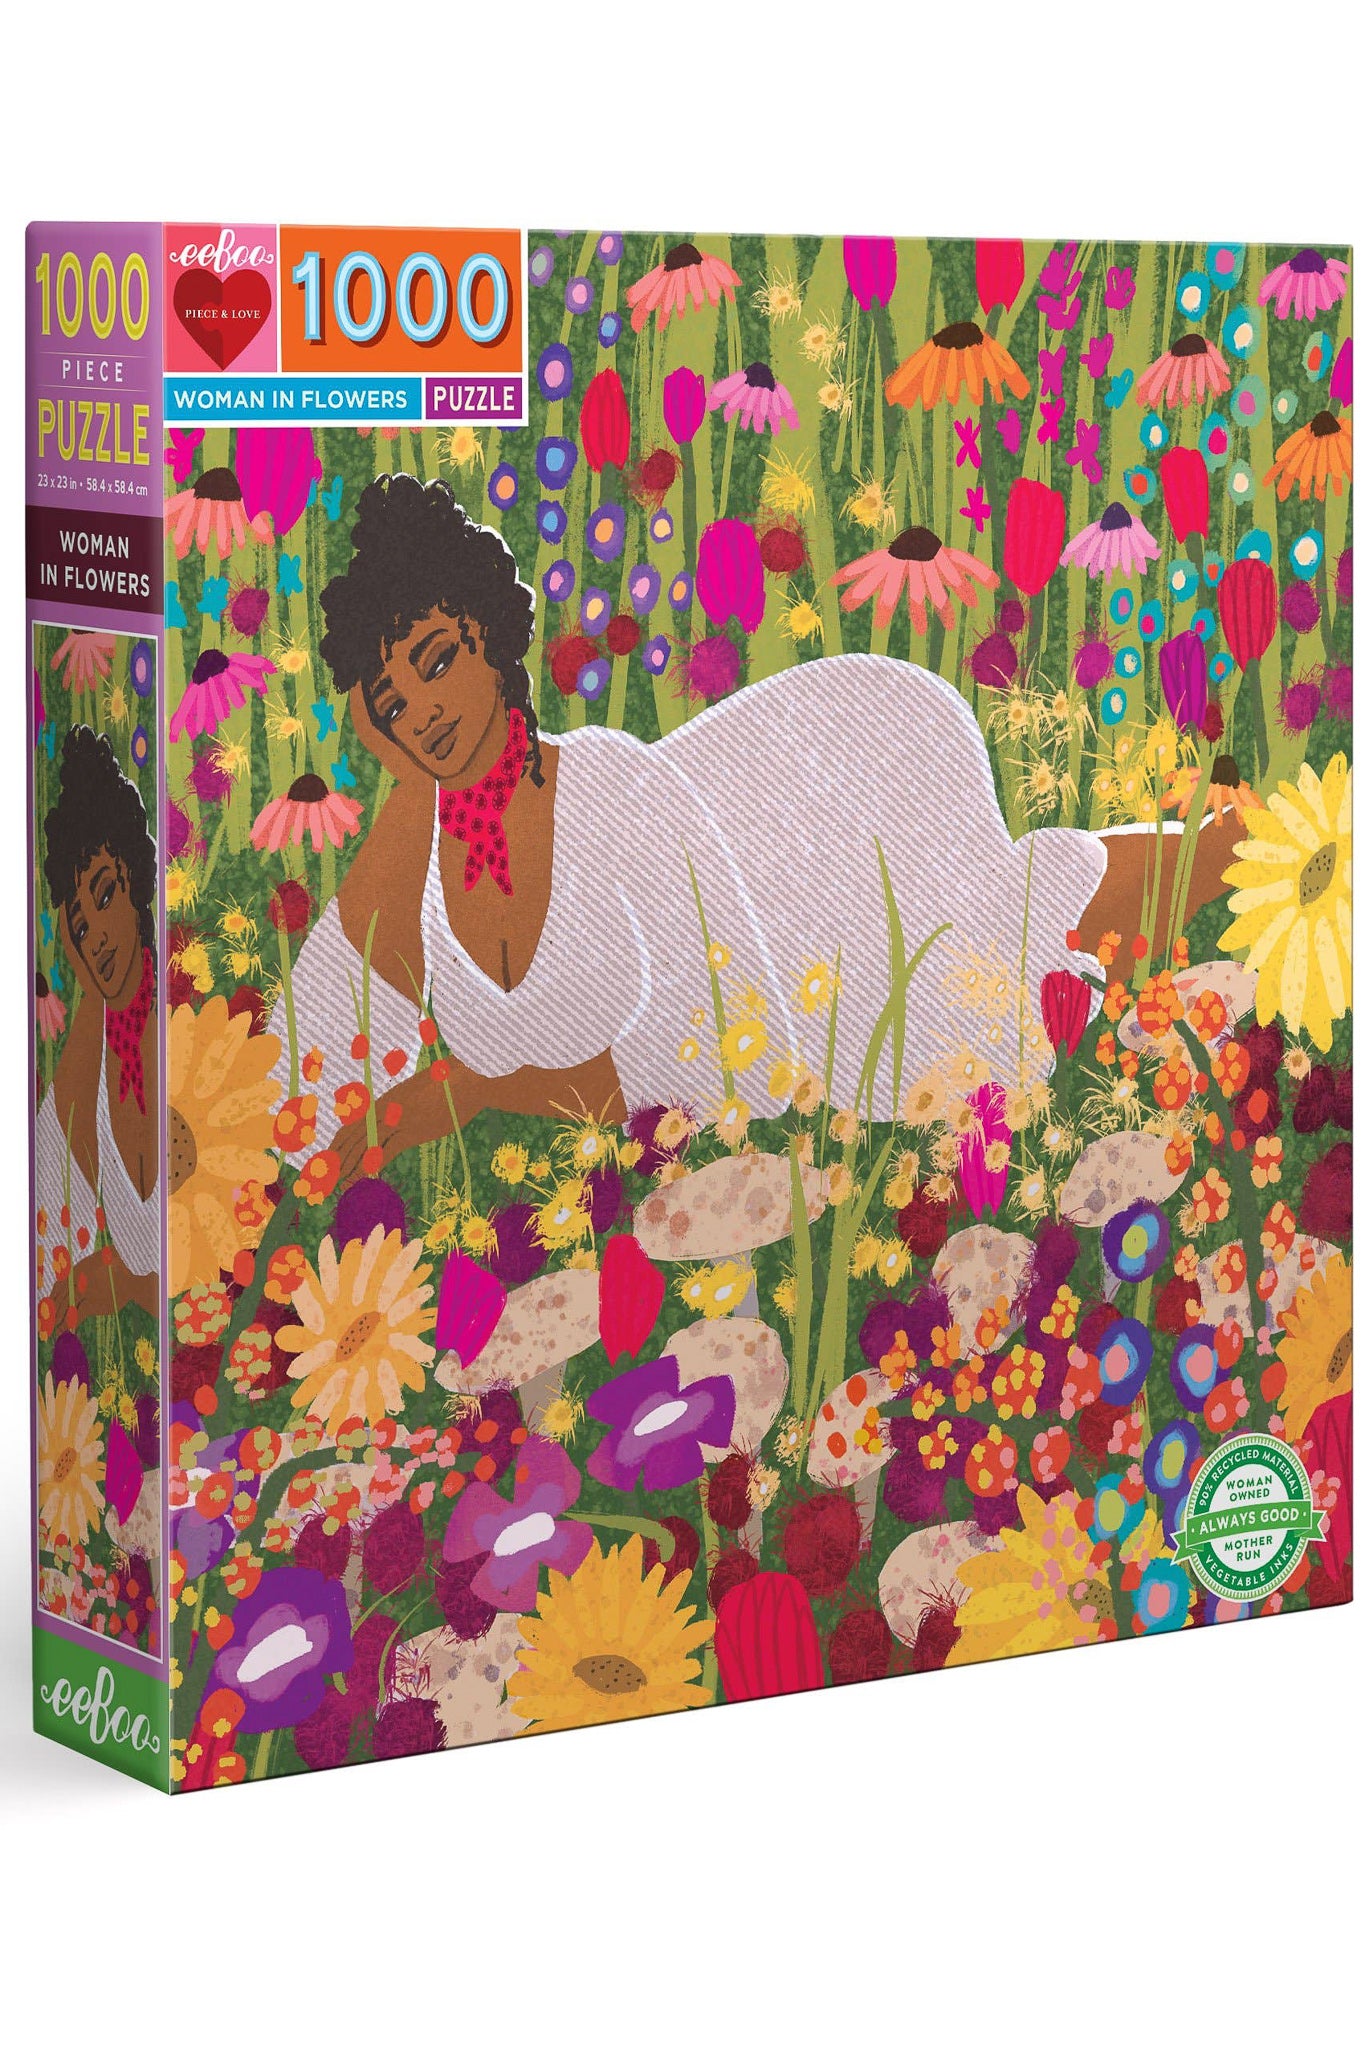 Woman in Flowers 1000 Piece Puzzle